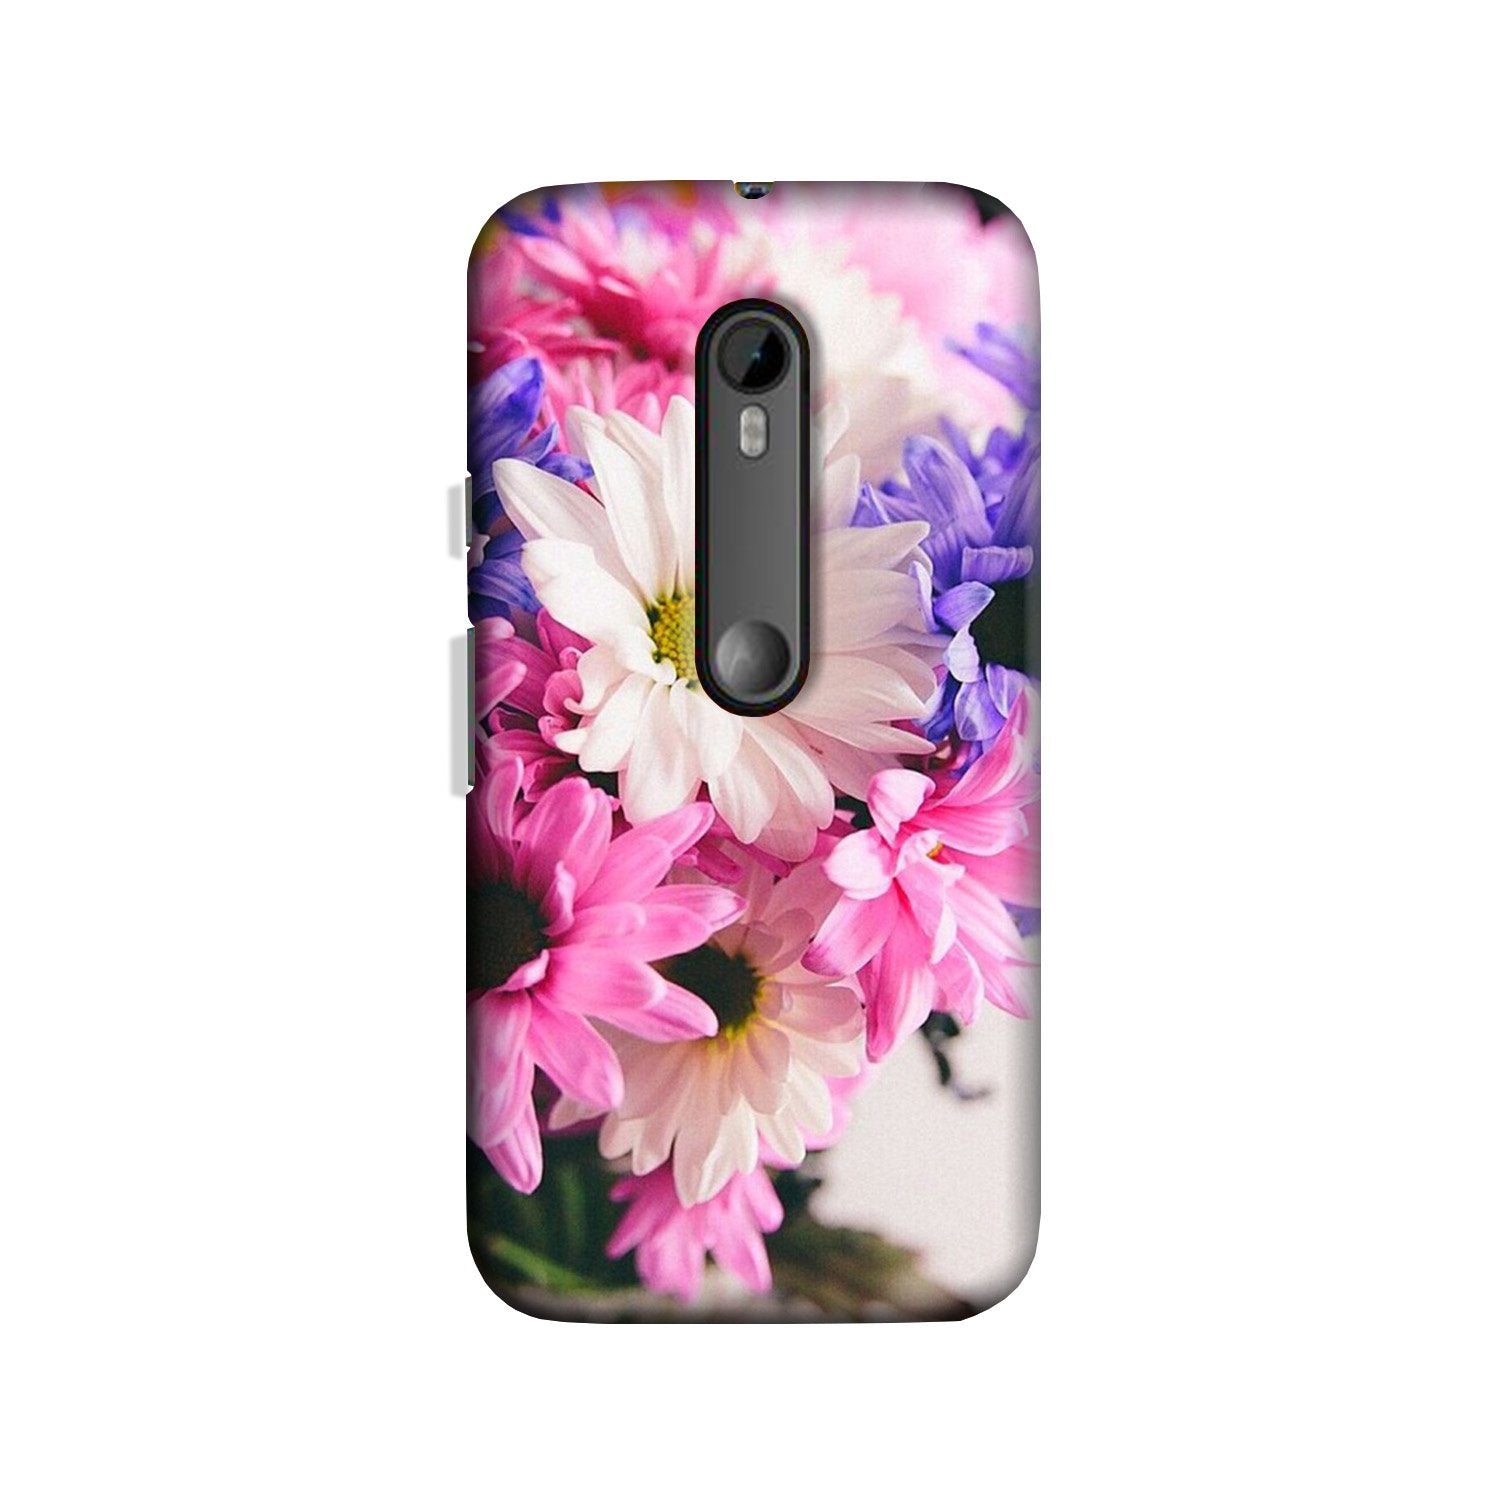 Coloful Daisy Case for Moto X Force